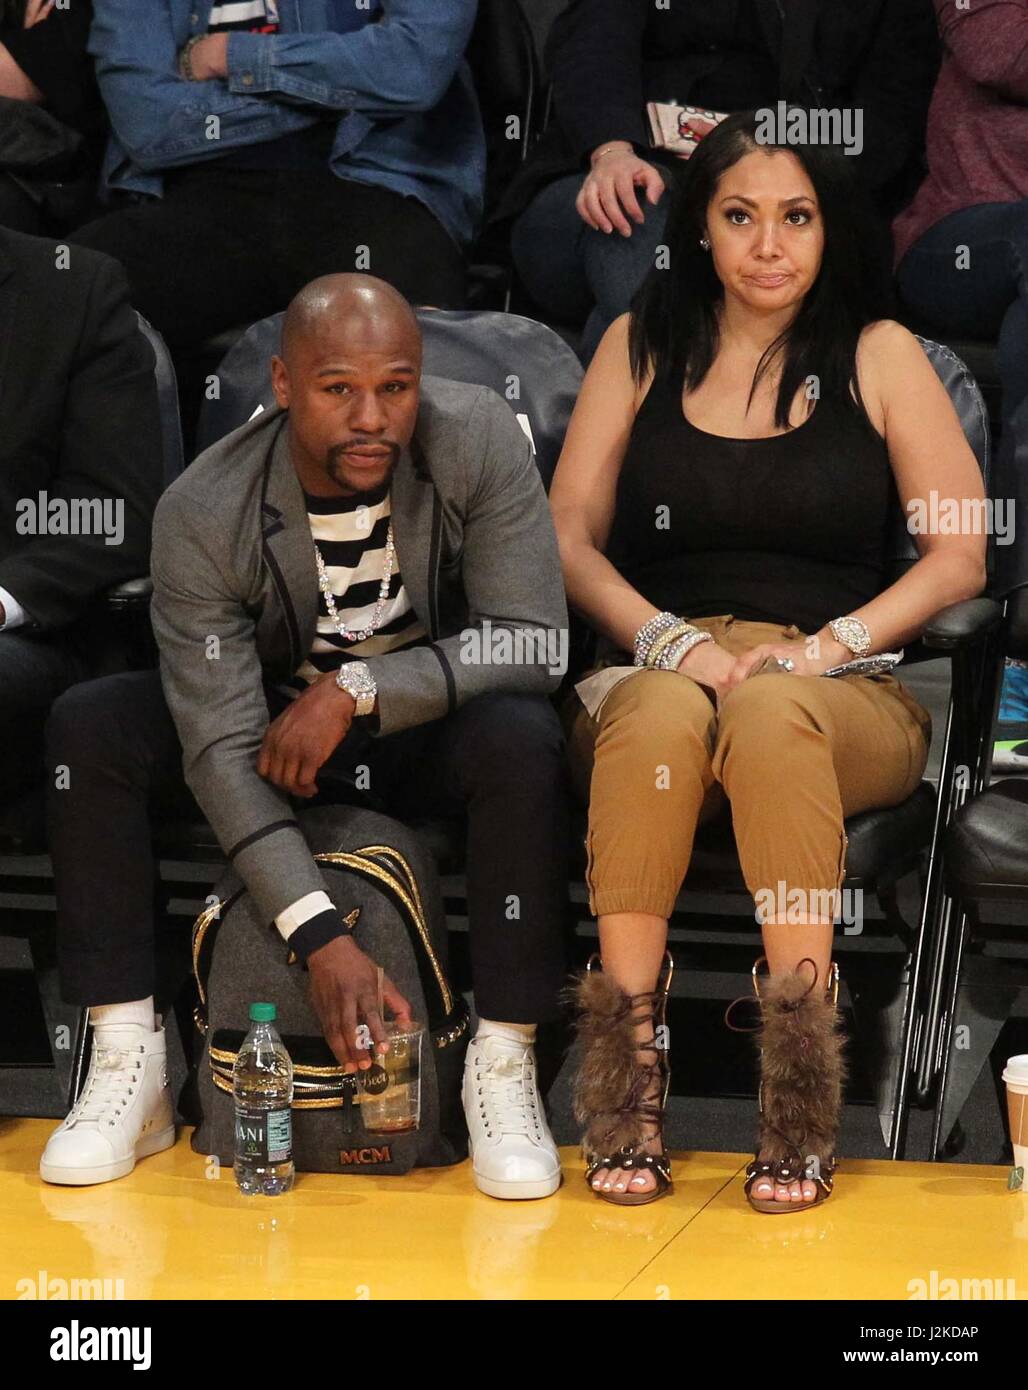 Celebrities at the Lakers game. The Washington Wizards defeated